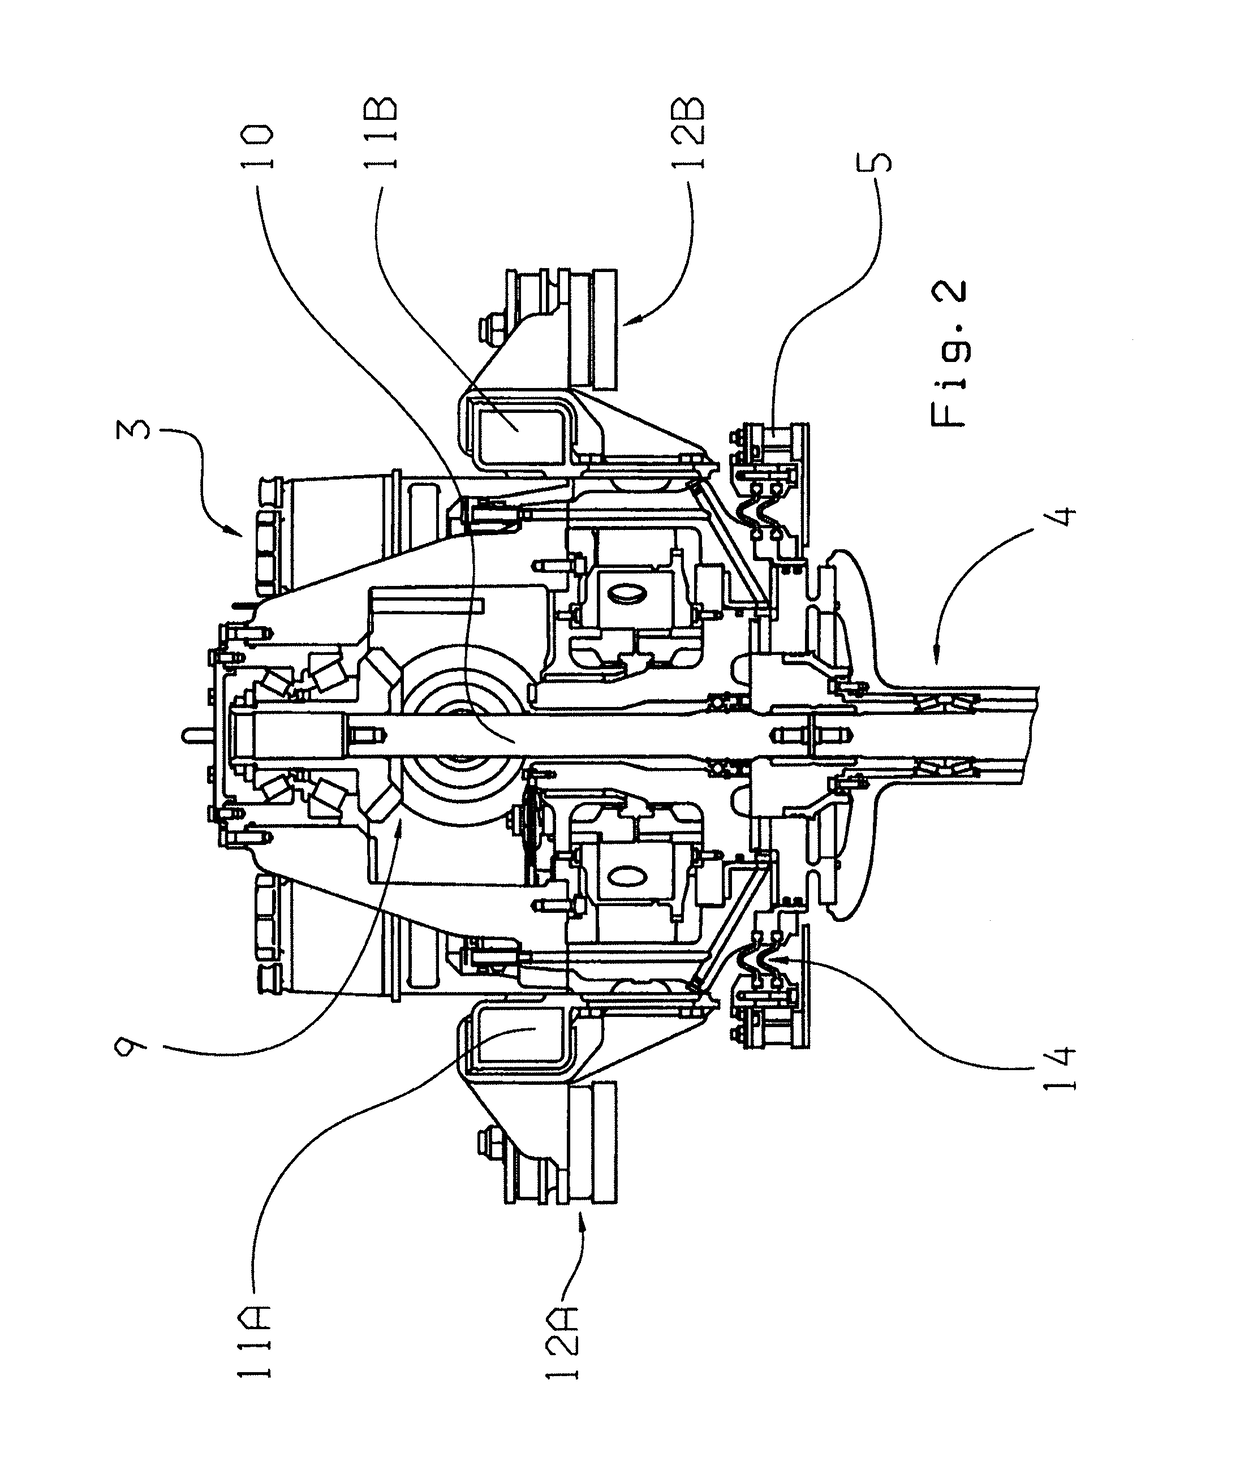 Drive arrangement for an inboard-outboard drive engine of a watercraft